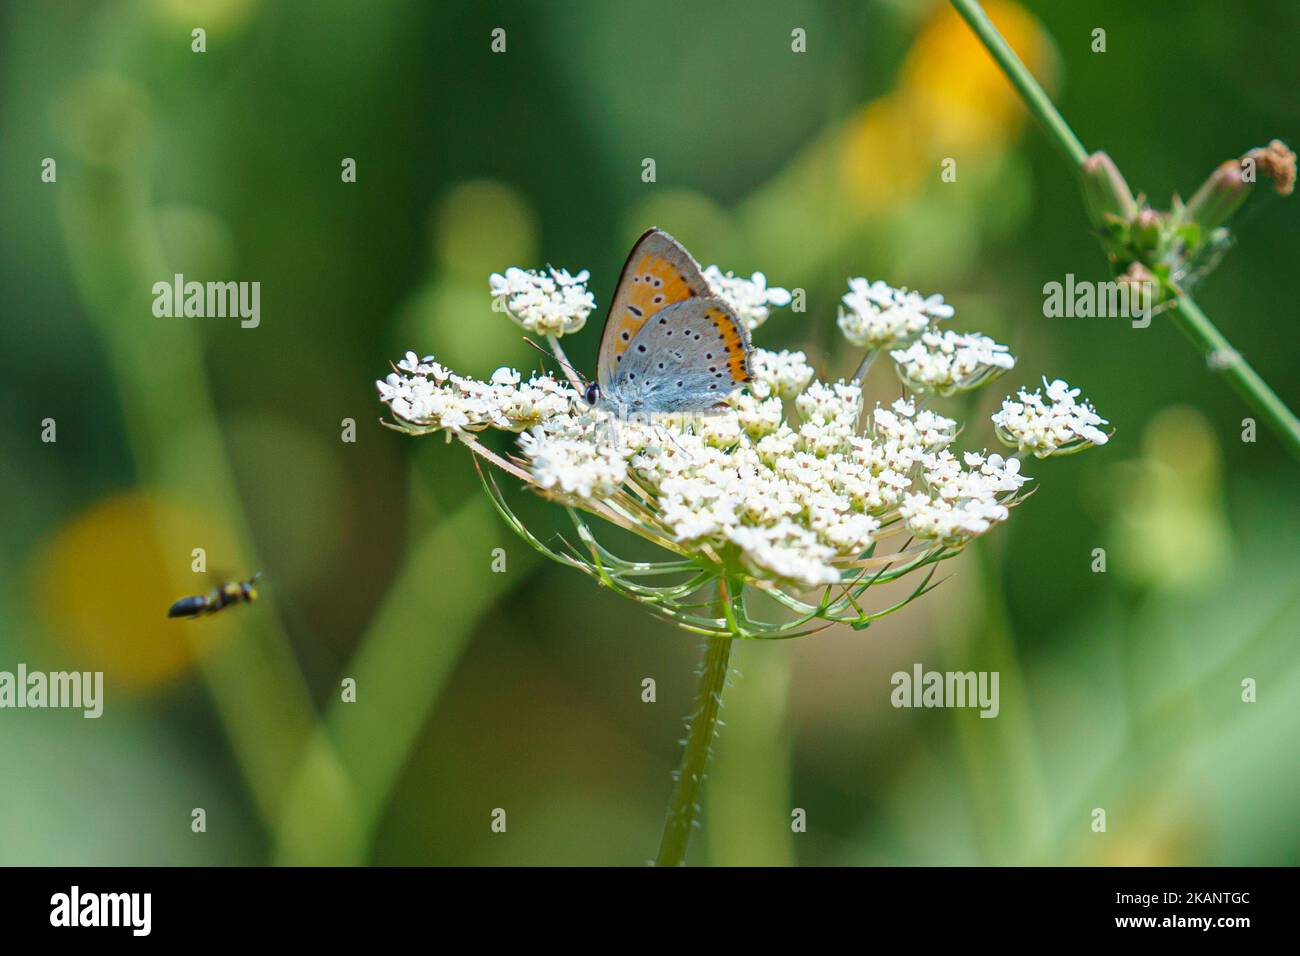 A beautiful large copper butterfly (Lycaena dispar) resting on a flower with a flying fly on the blurred background Stock Photo